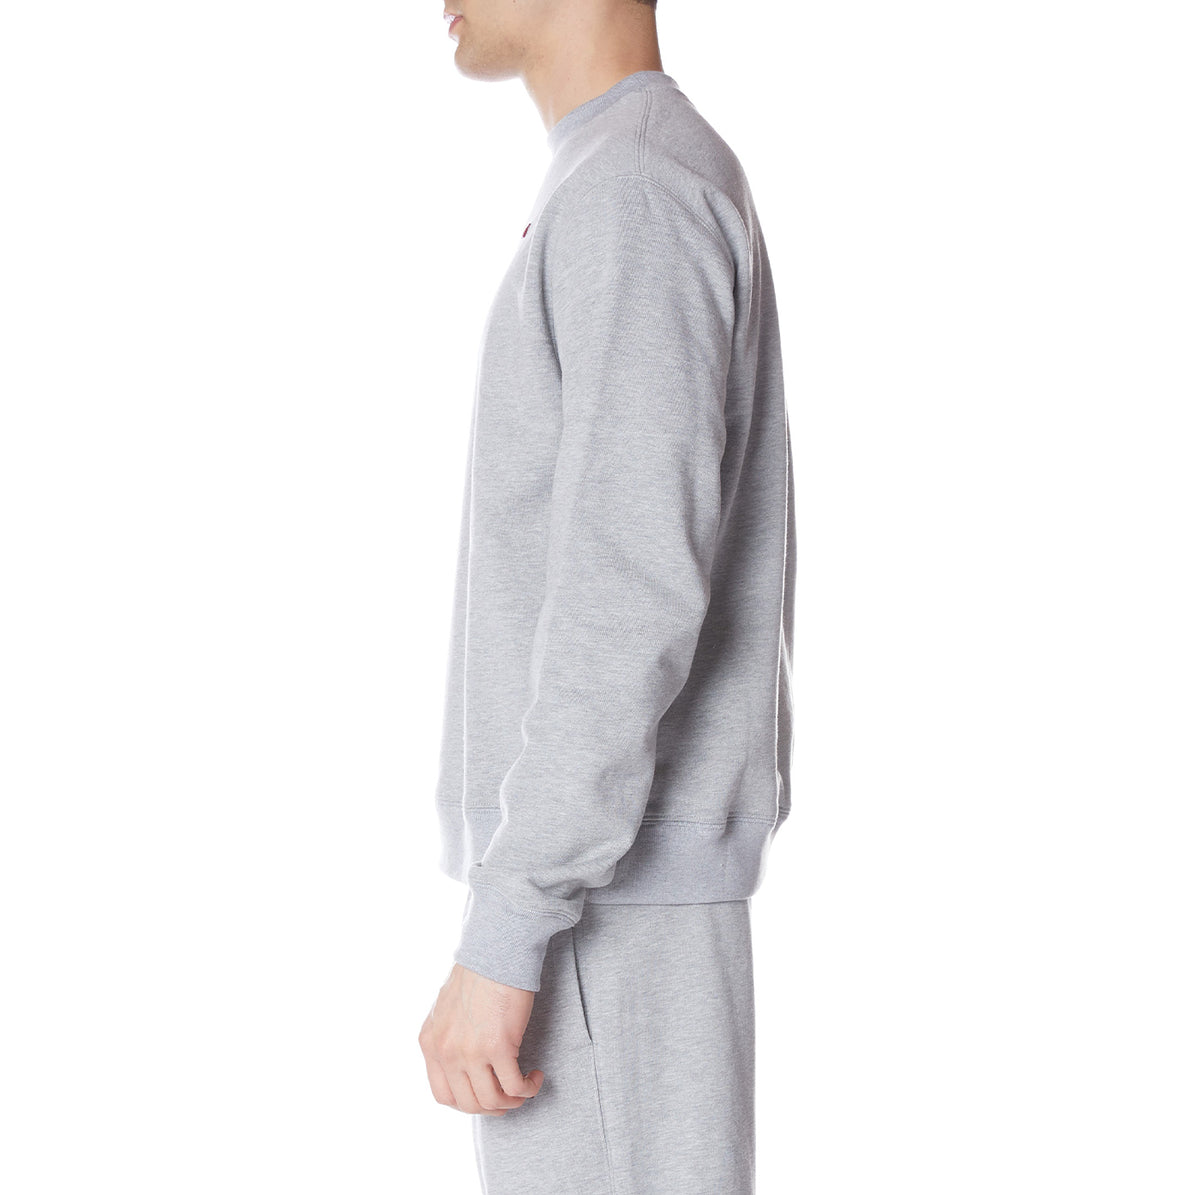 Our online features extensive selection of products Robe Grevan Pullover - Grey Kappa US